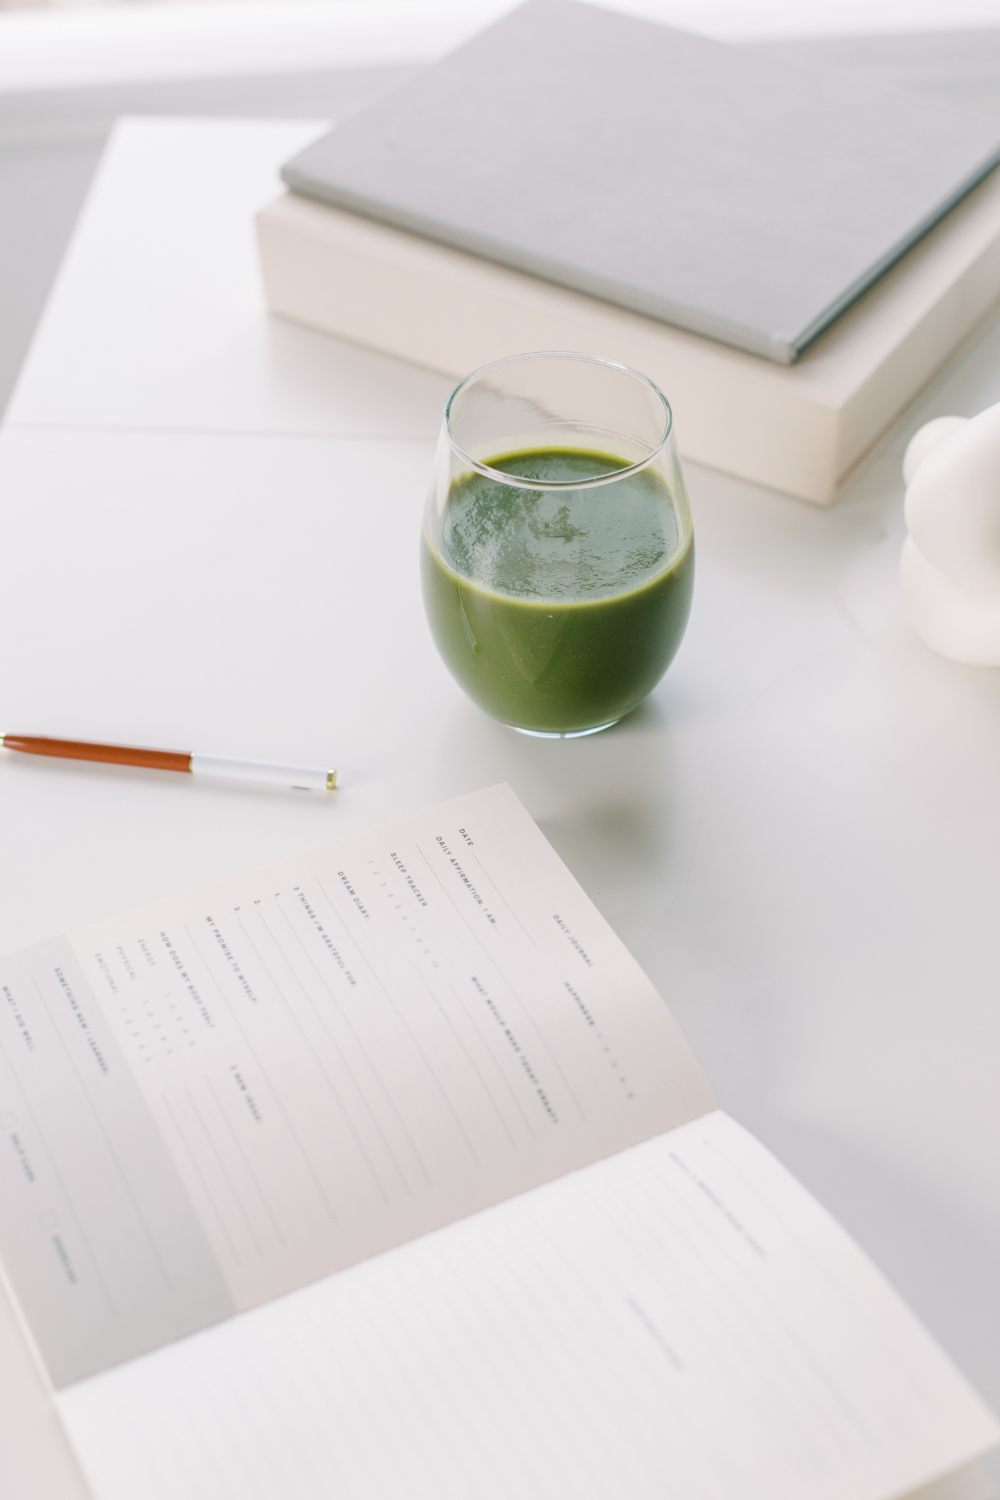 A glass of green juice, a pen, and an open planner on a clean, white table representing holistic wellness at Liv Med Spa in Sioux Falls